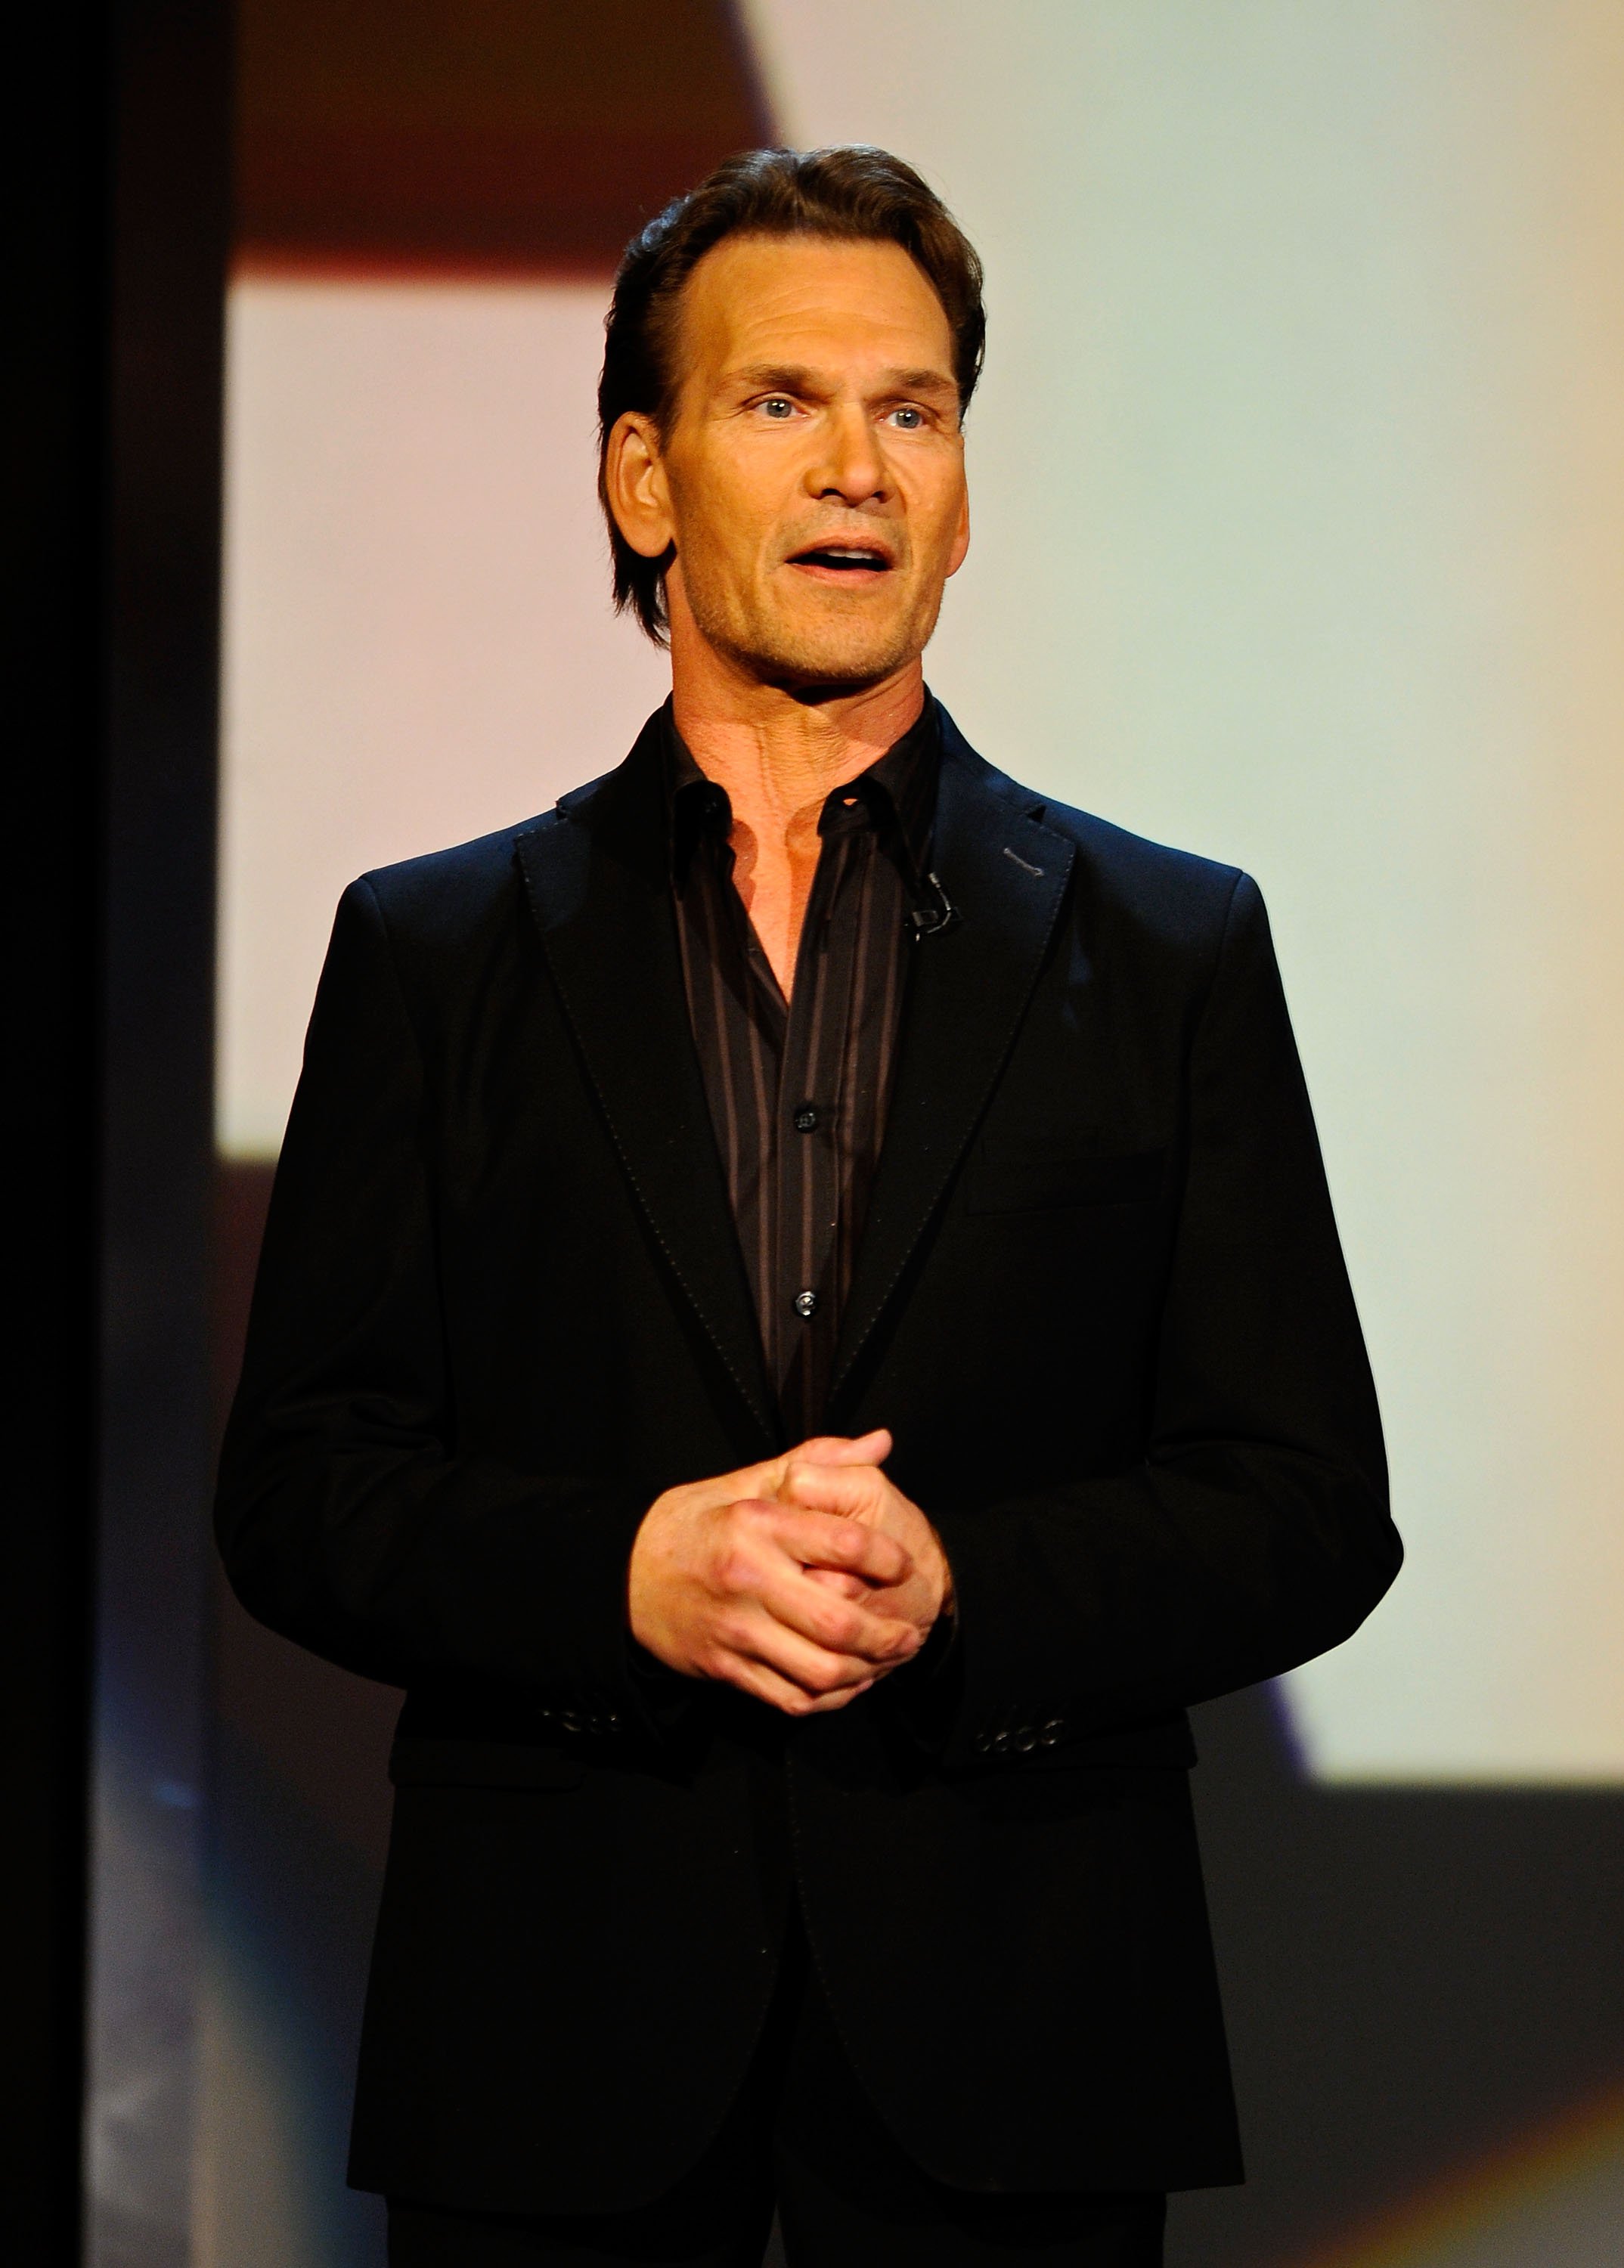 Patrick Swayze attends Stand Up To Cancer at The Kodak Theatre on September 5, 2008, in Hollywood, California. | Source: Getty Images